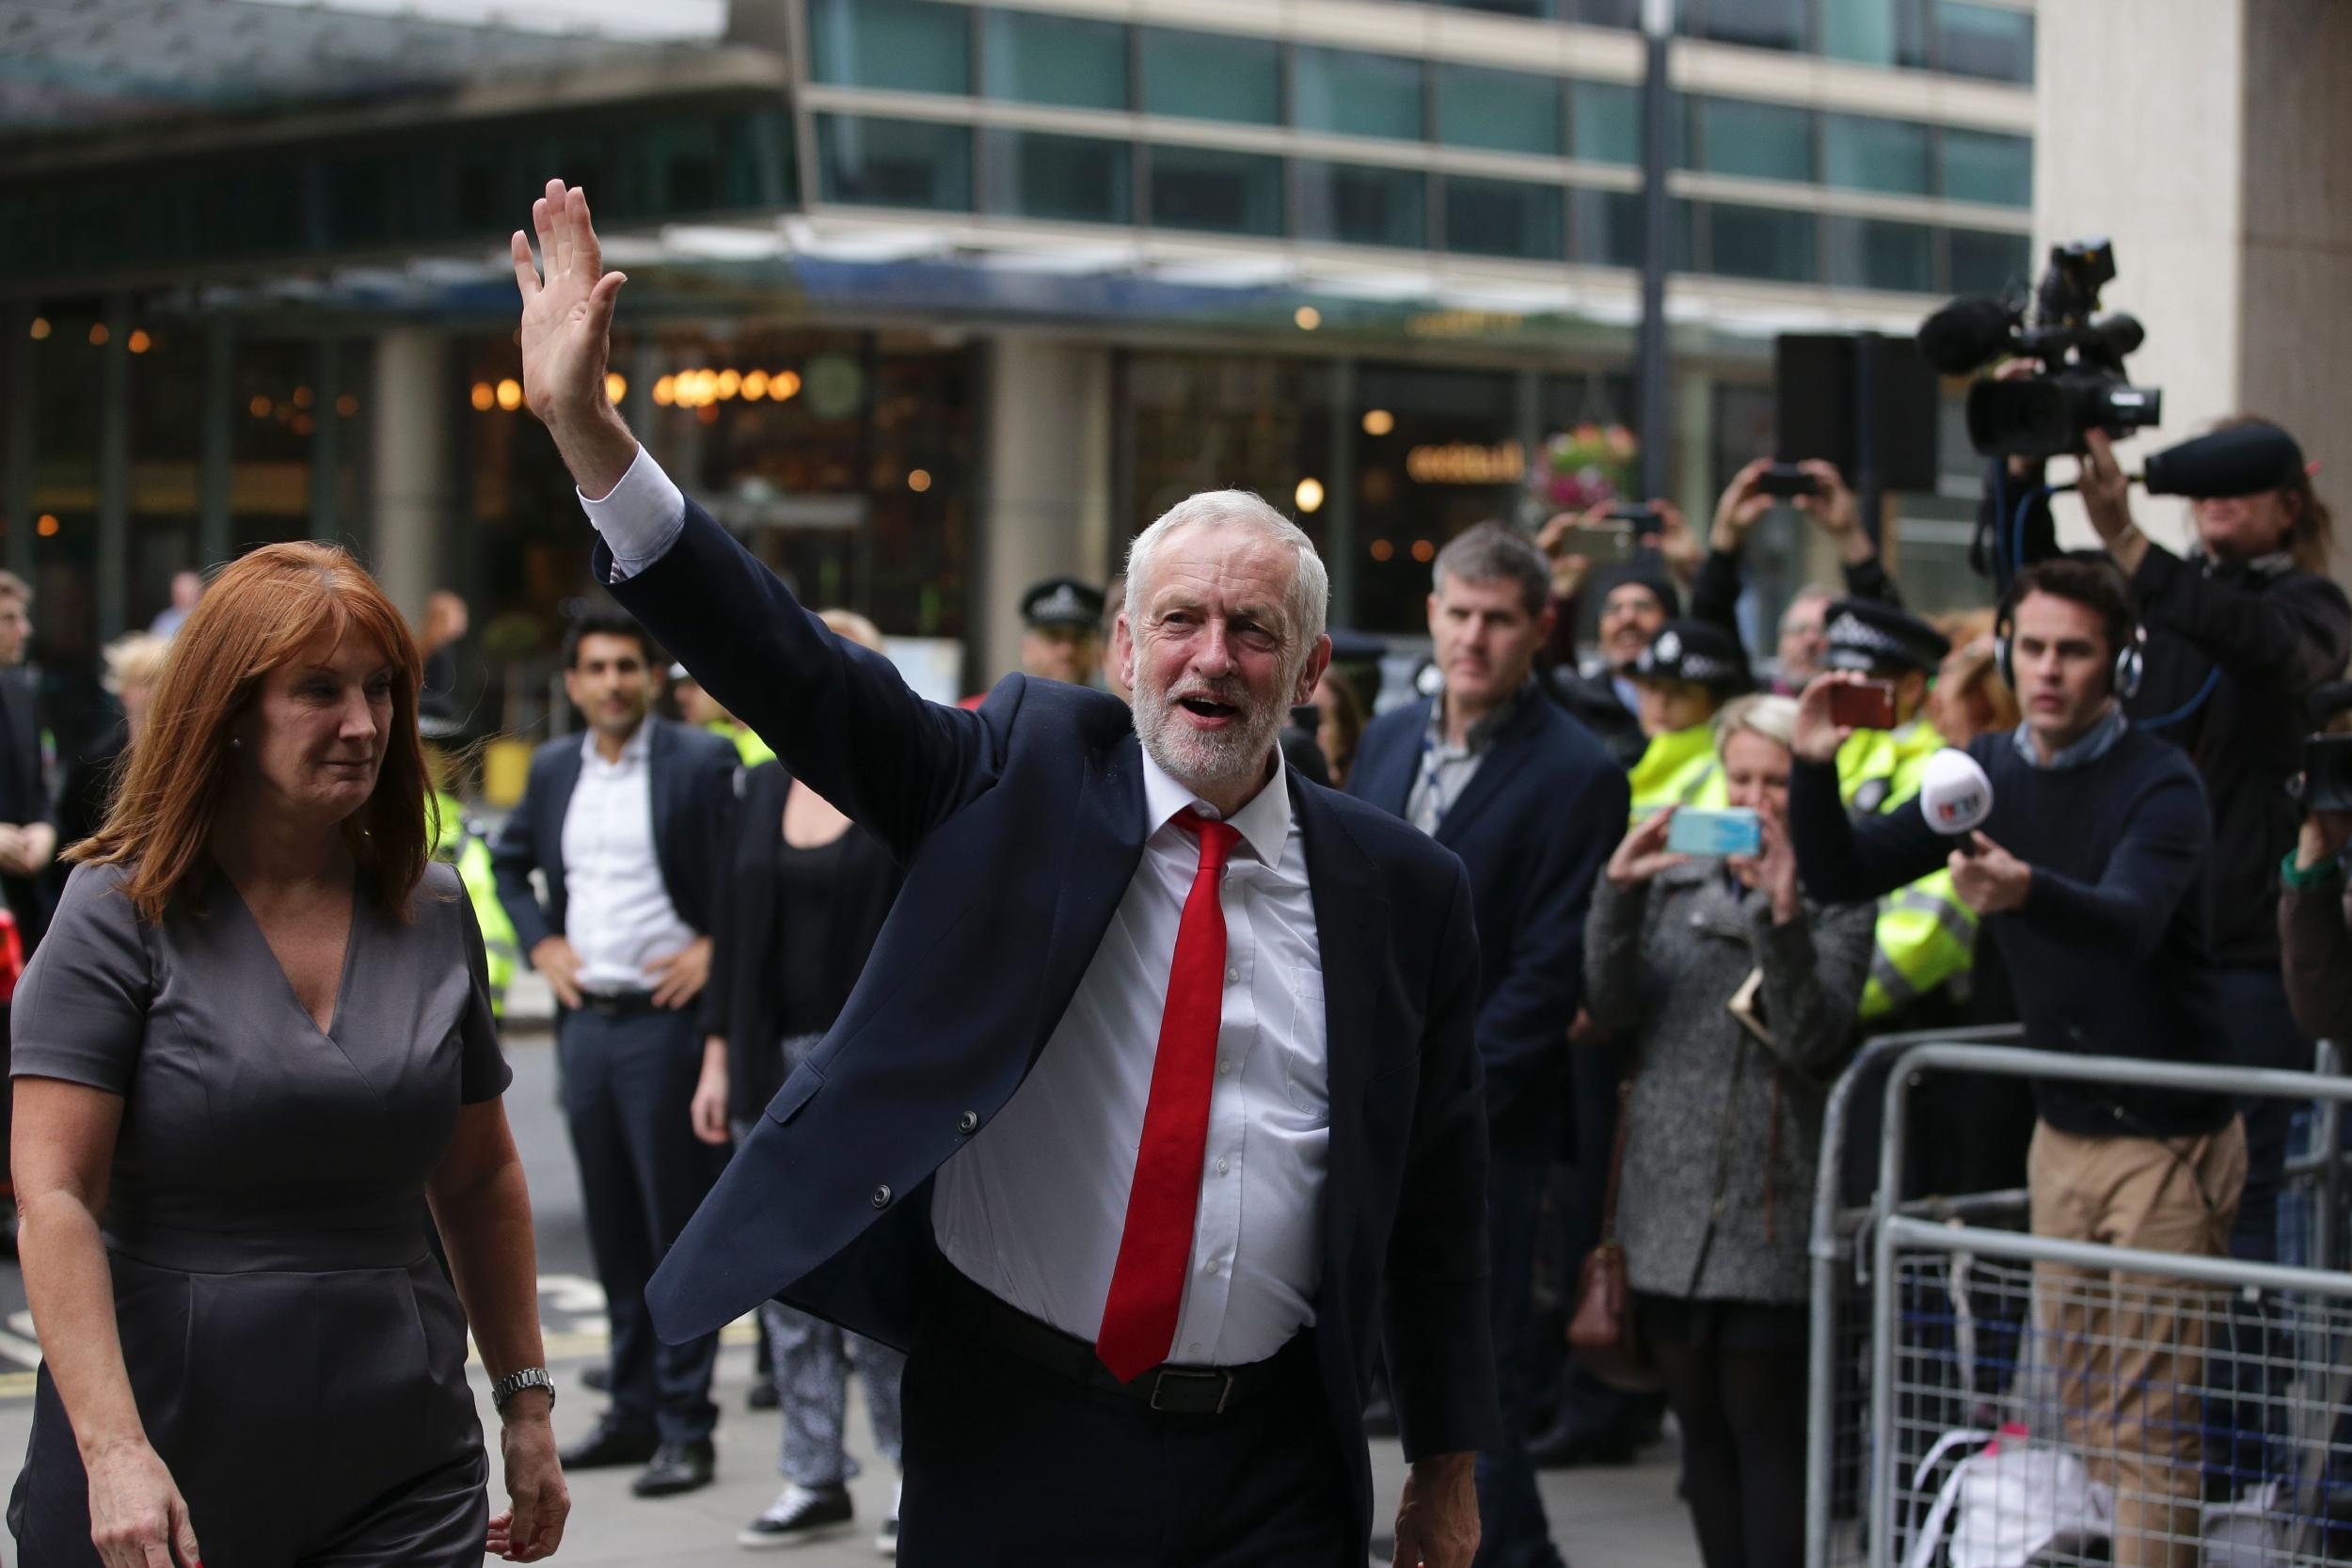 Labour Party Leader Jeremy Corbyn waves as he arrives at Labour Party headquarters in central London after the results of a recent snap election